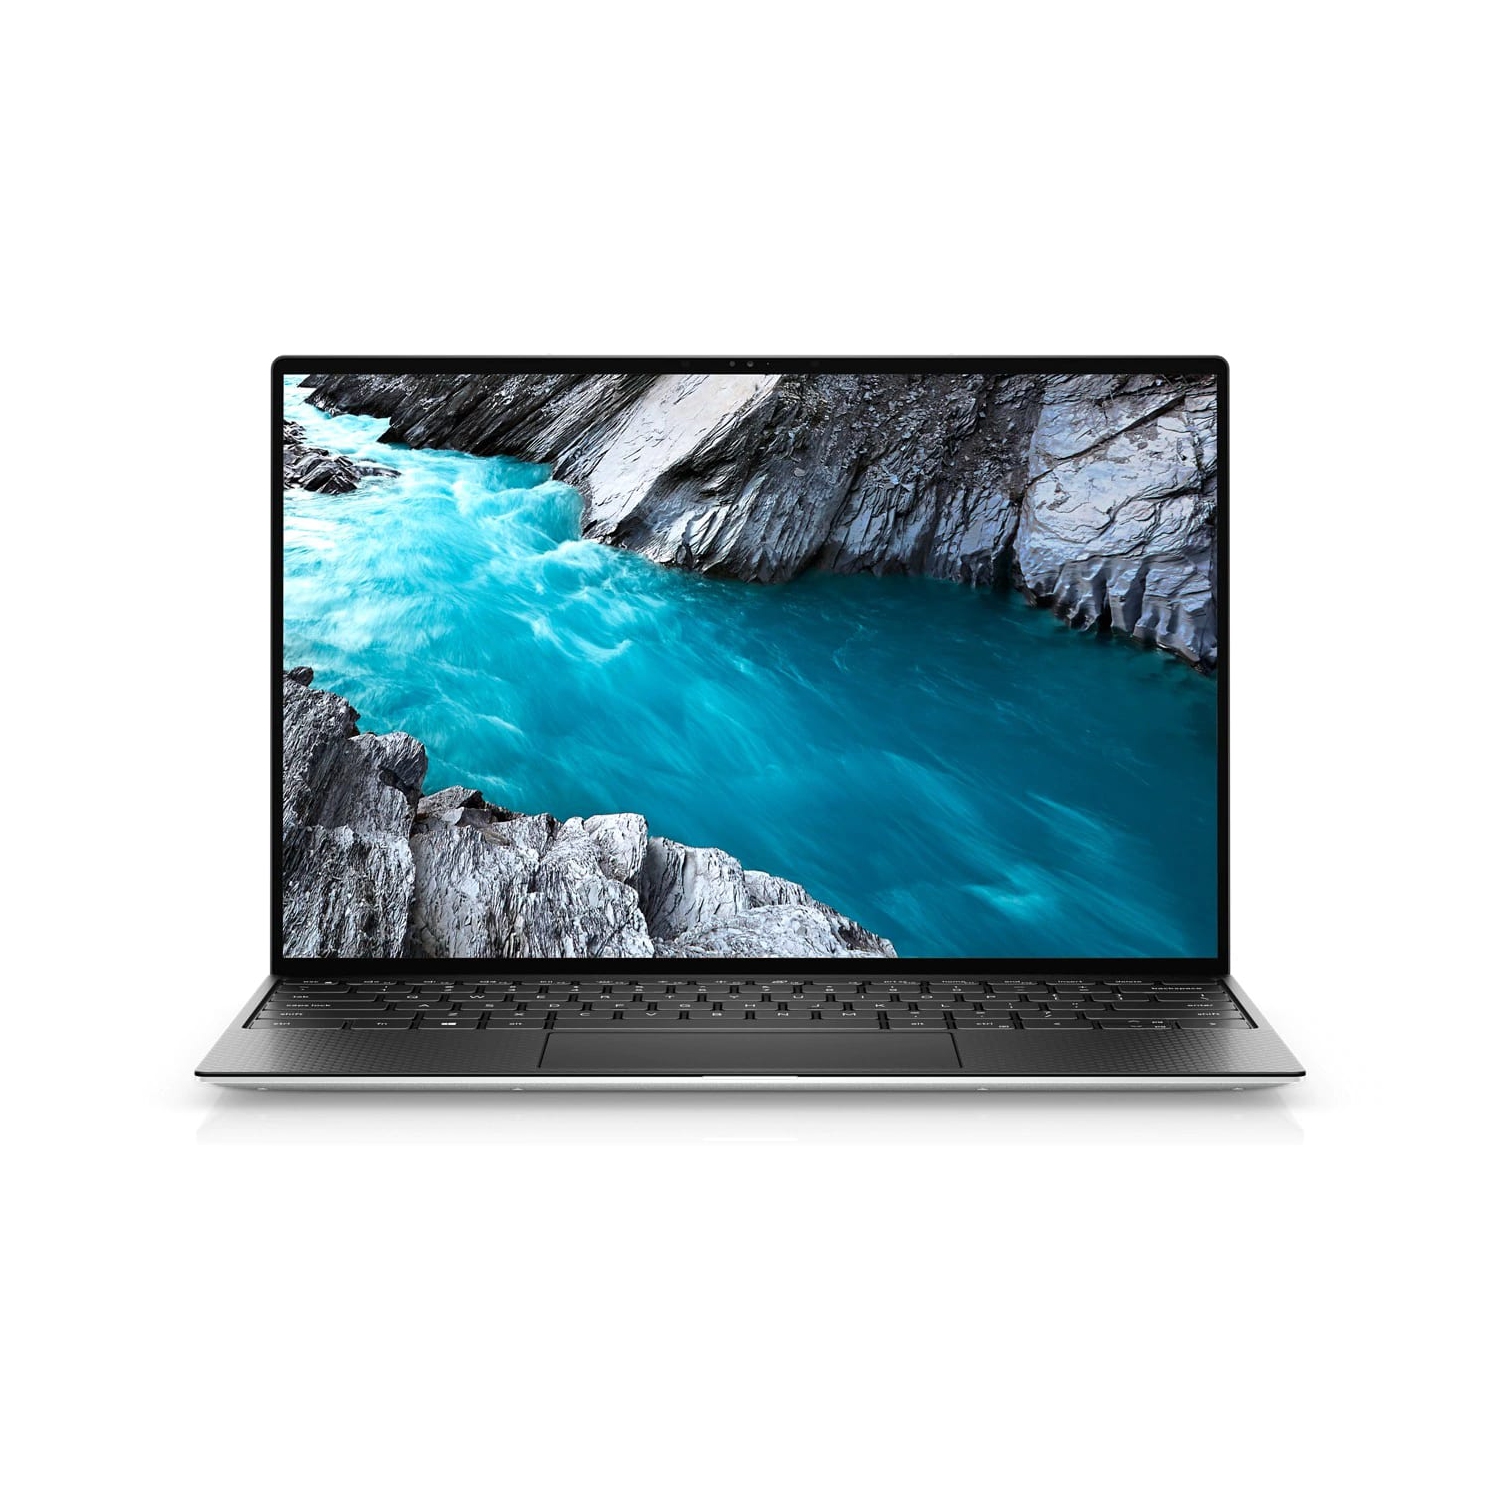 Refurbished (Excellent) - Dell XPS 13 9310 Laptop (2020) | 13.4" FHD+ | Core i7 - 1TB SSD - 16GB RAM | 4 Cores @ 5 GHz - 11th Gen CPU Certified Refurbished